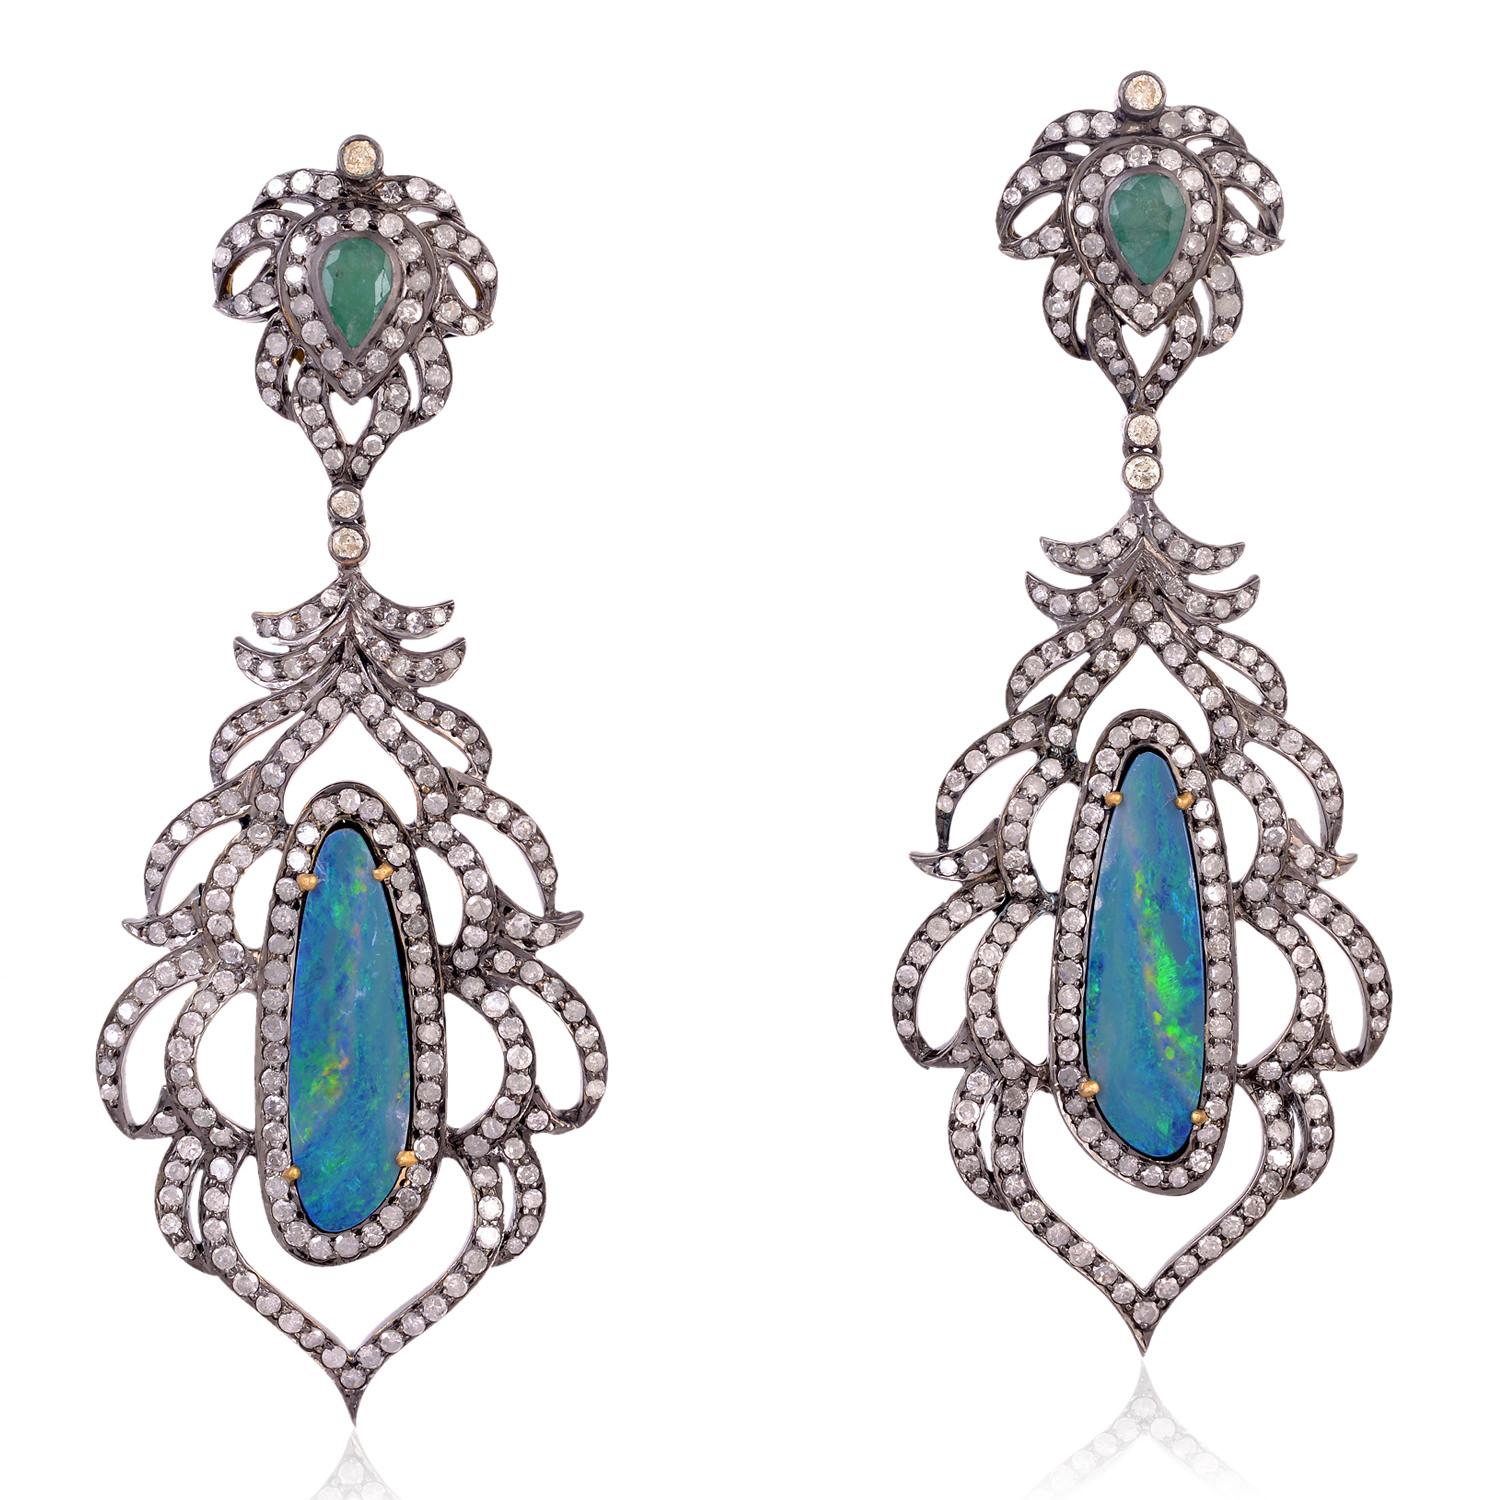 Mixed Cut Sliced Opal & Emerald Earring With Pave Diamonds Made In 18k Gold & Silver For Sale